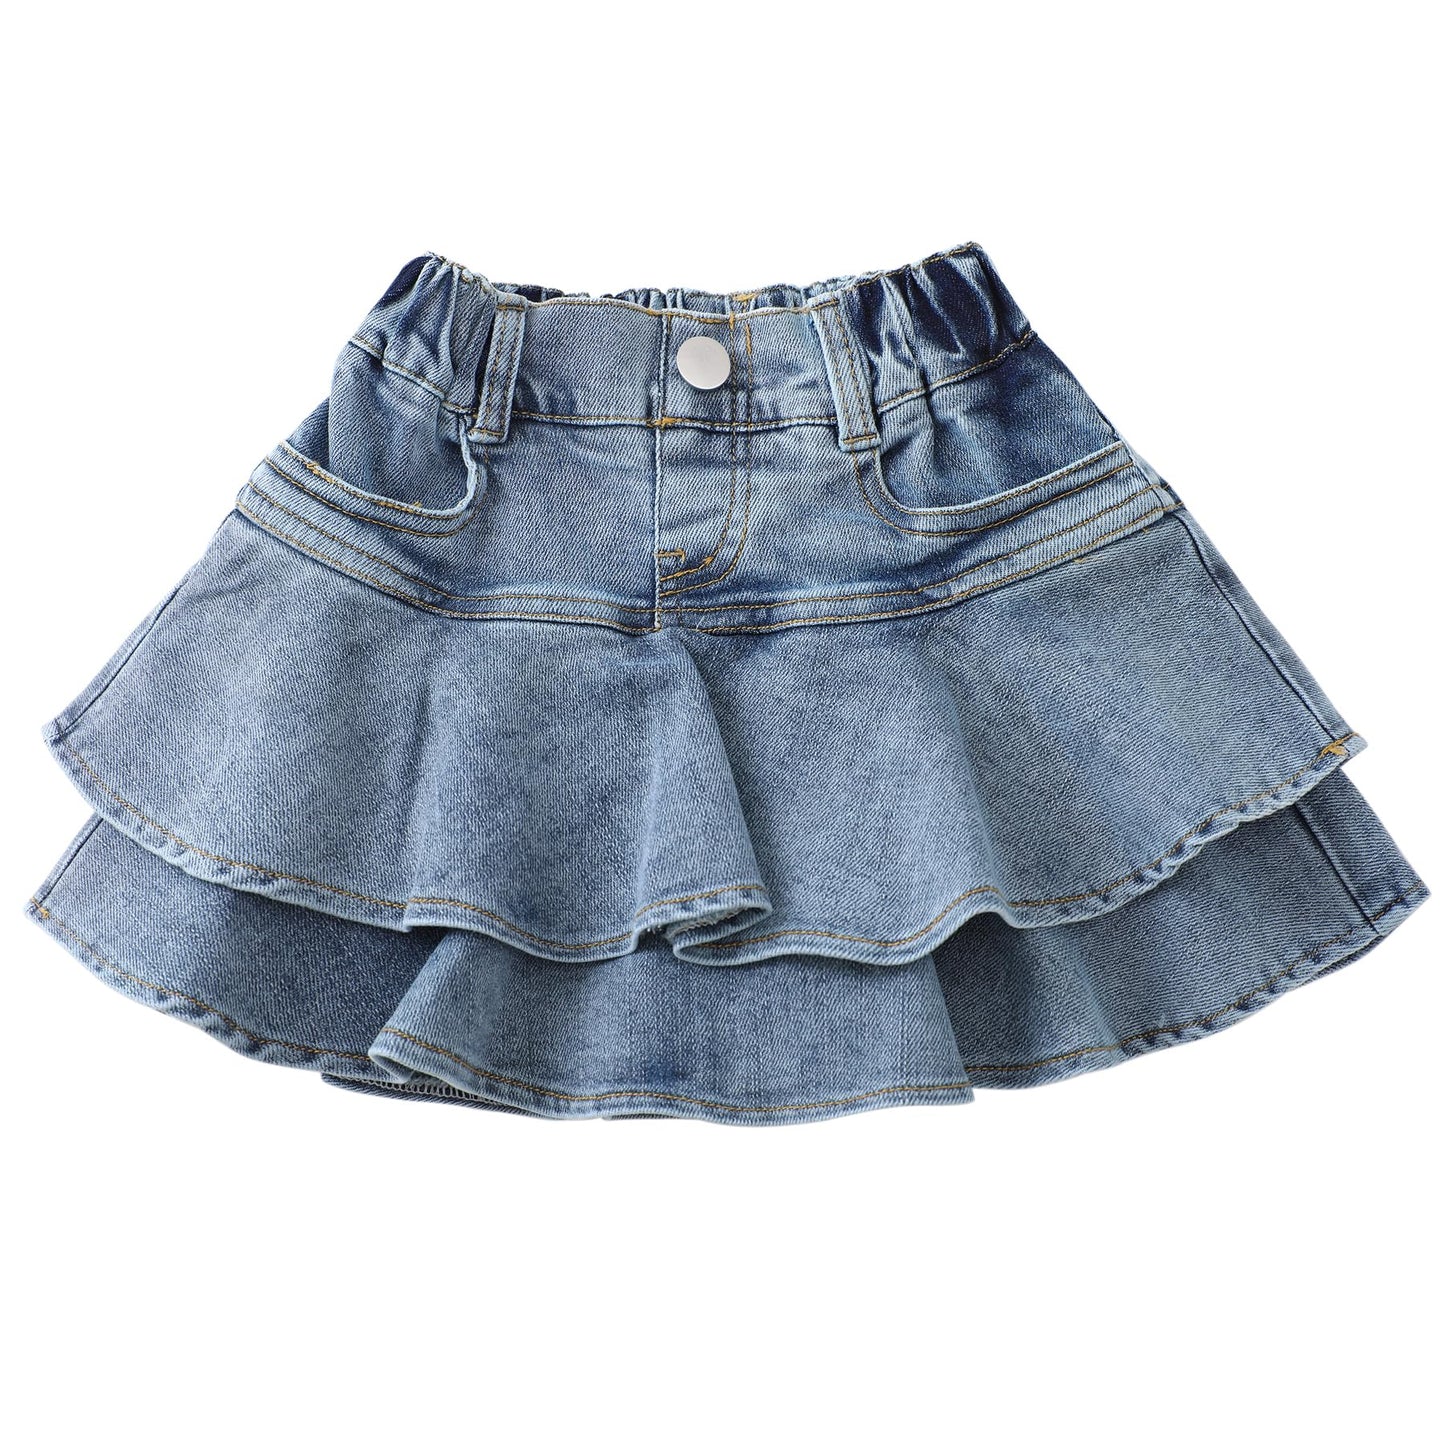 Flofallzique Little Girl Denim Skirts Mini Flared Layers Pleated Skirts for Toddlers Skorts 3 Years